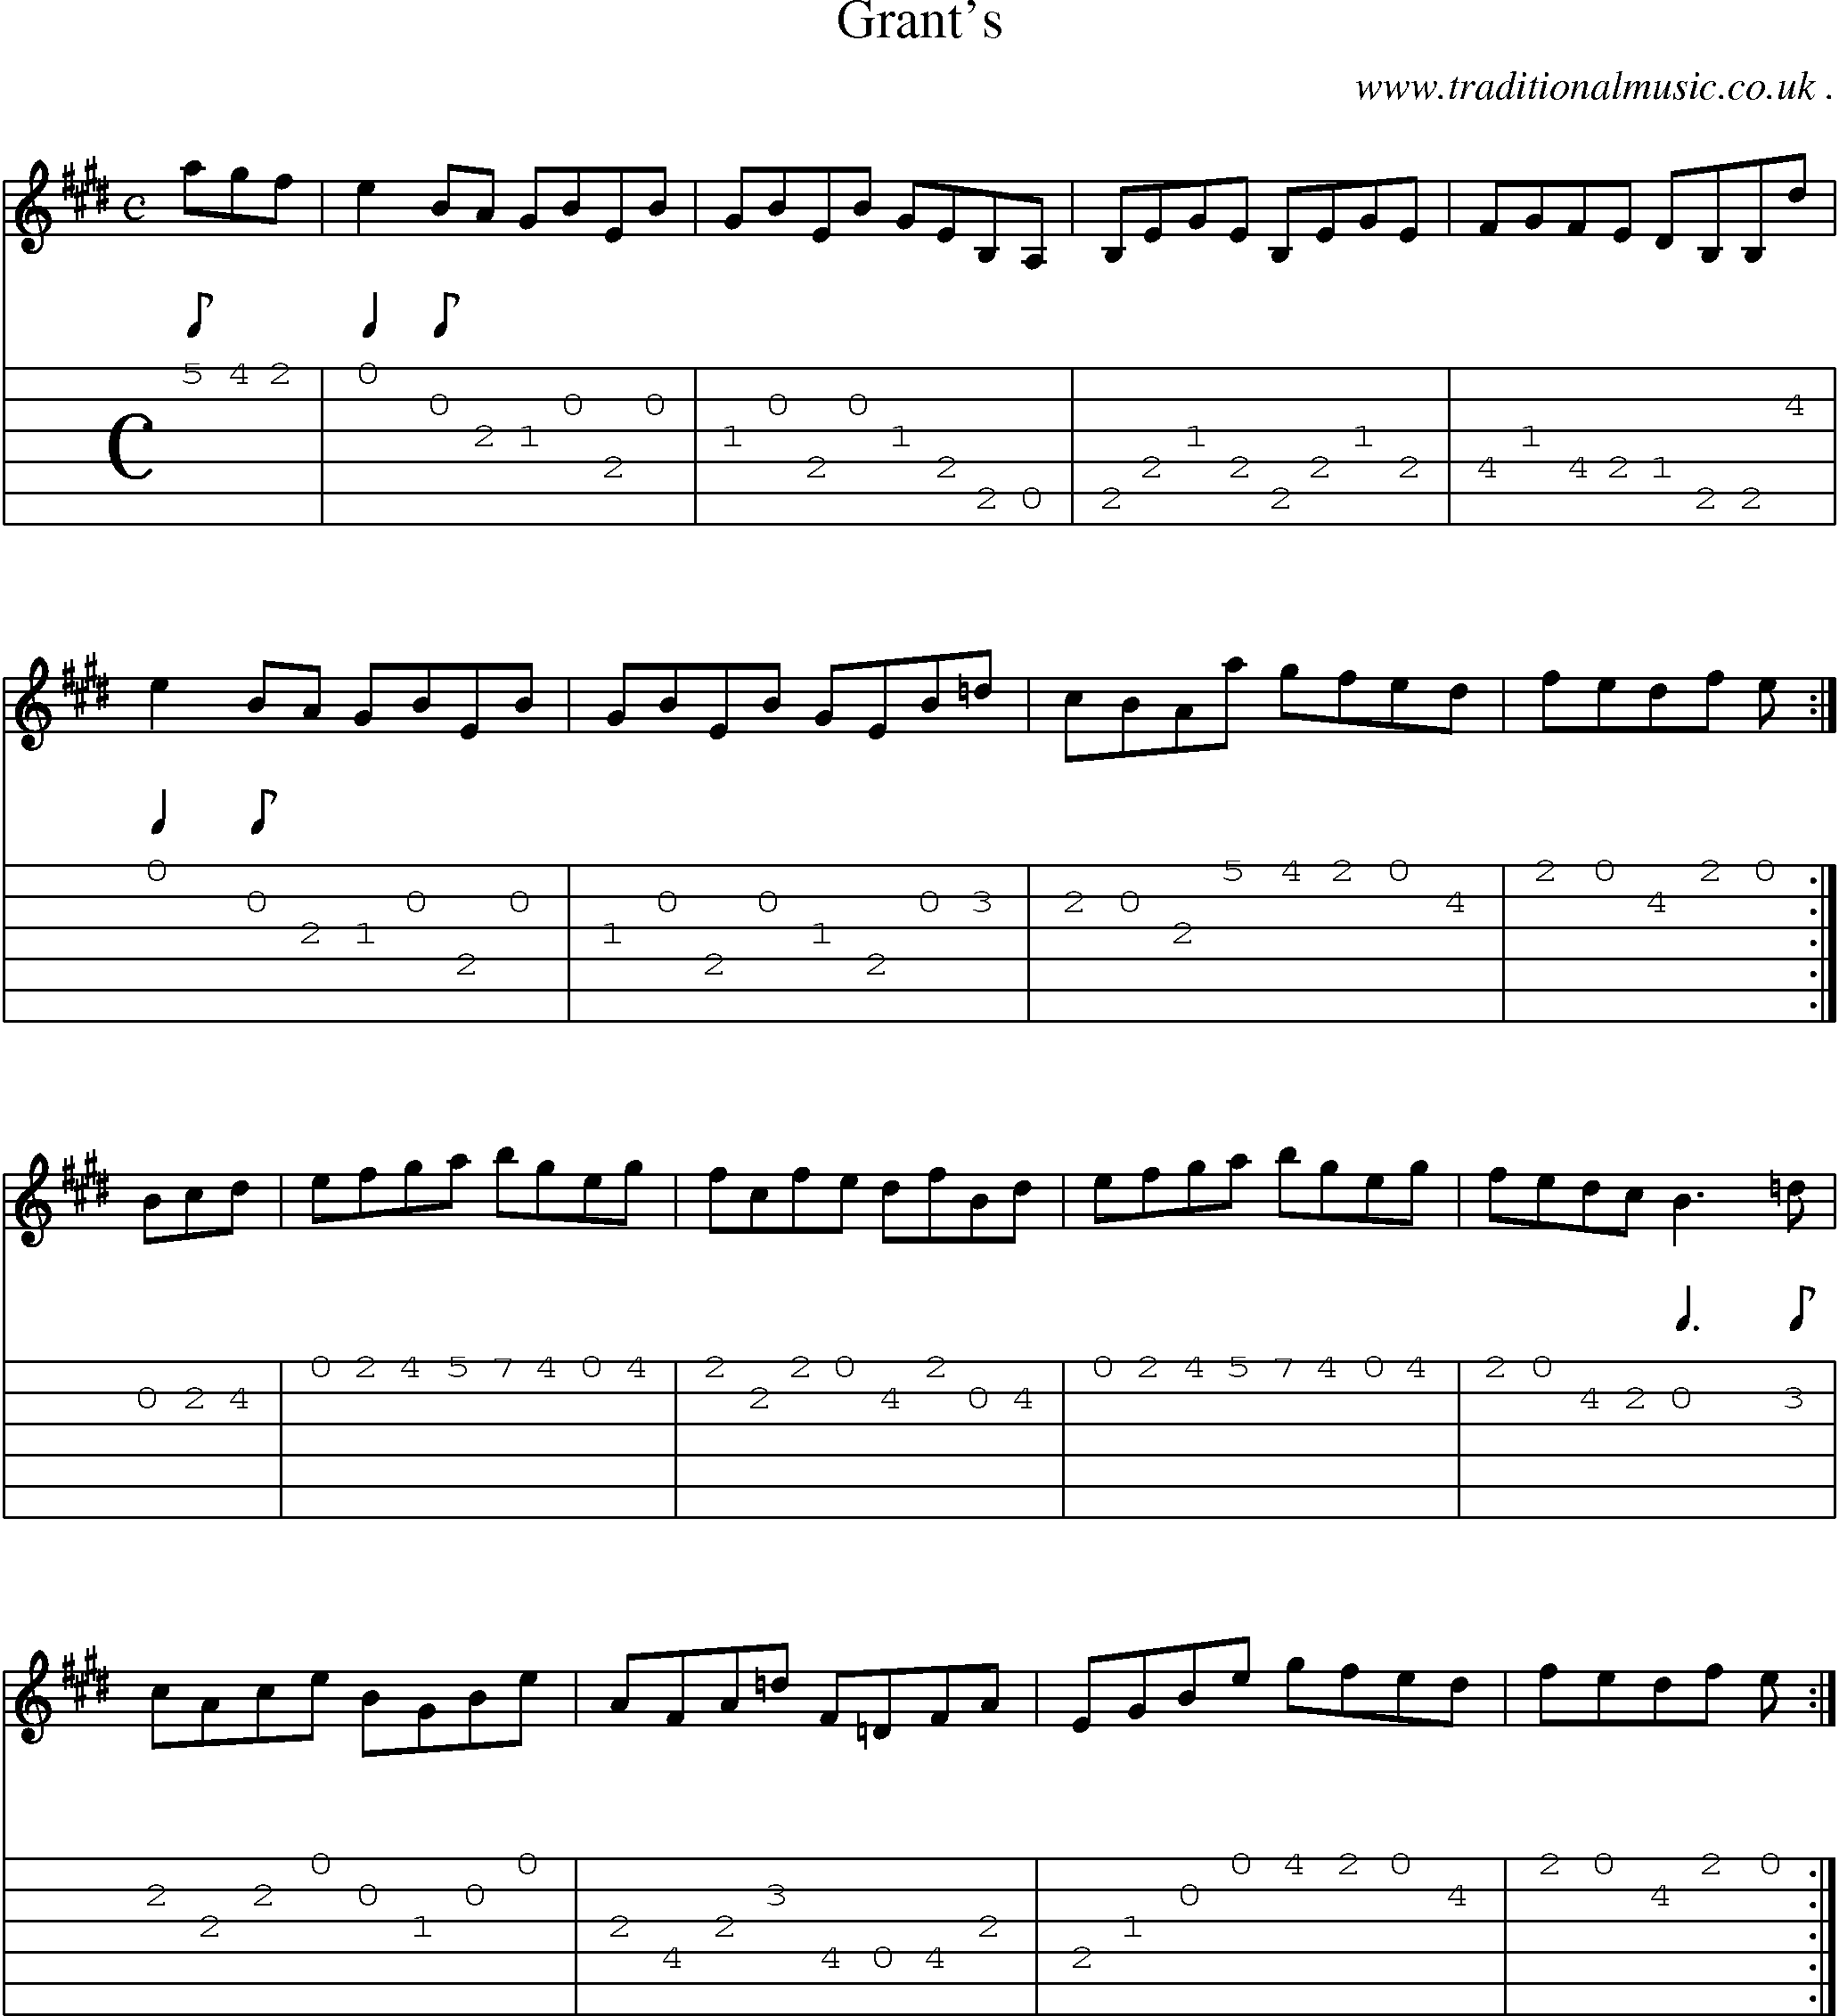 Sheet-Music and Guitar Tabs for Grants